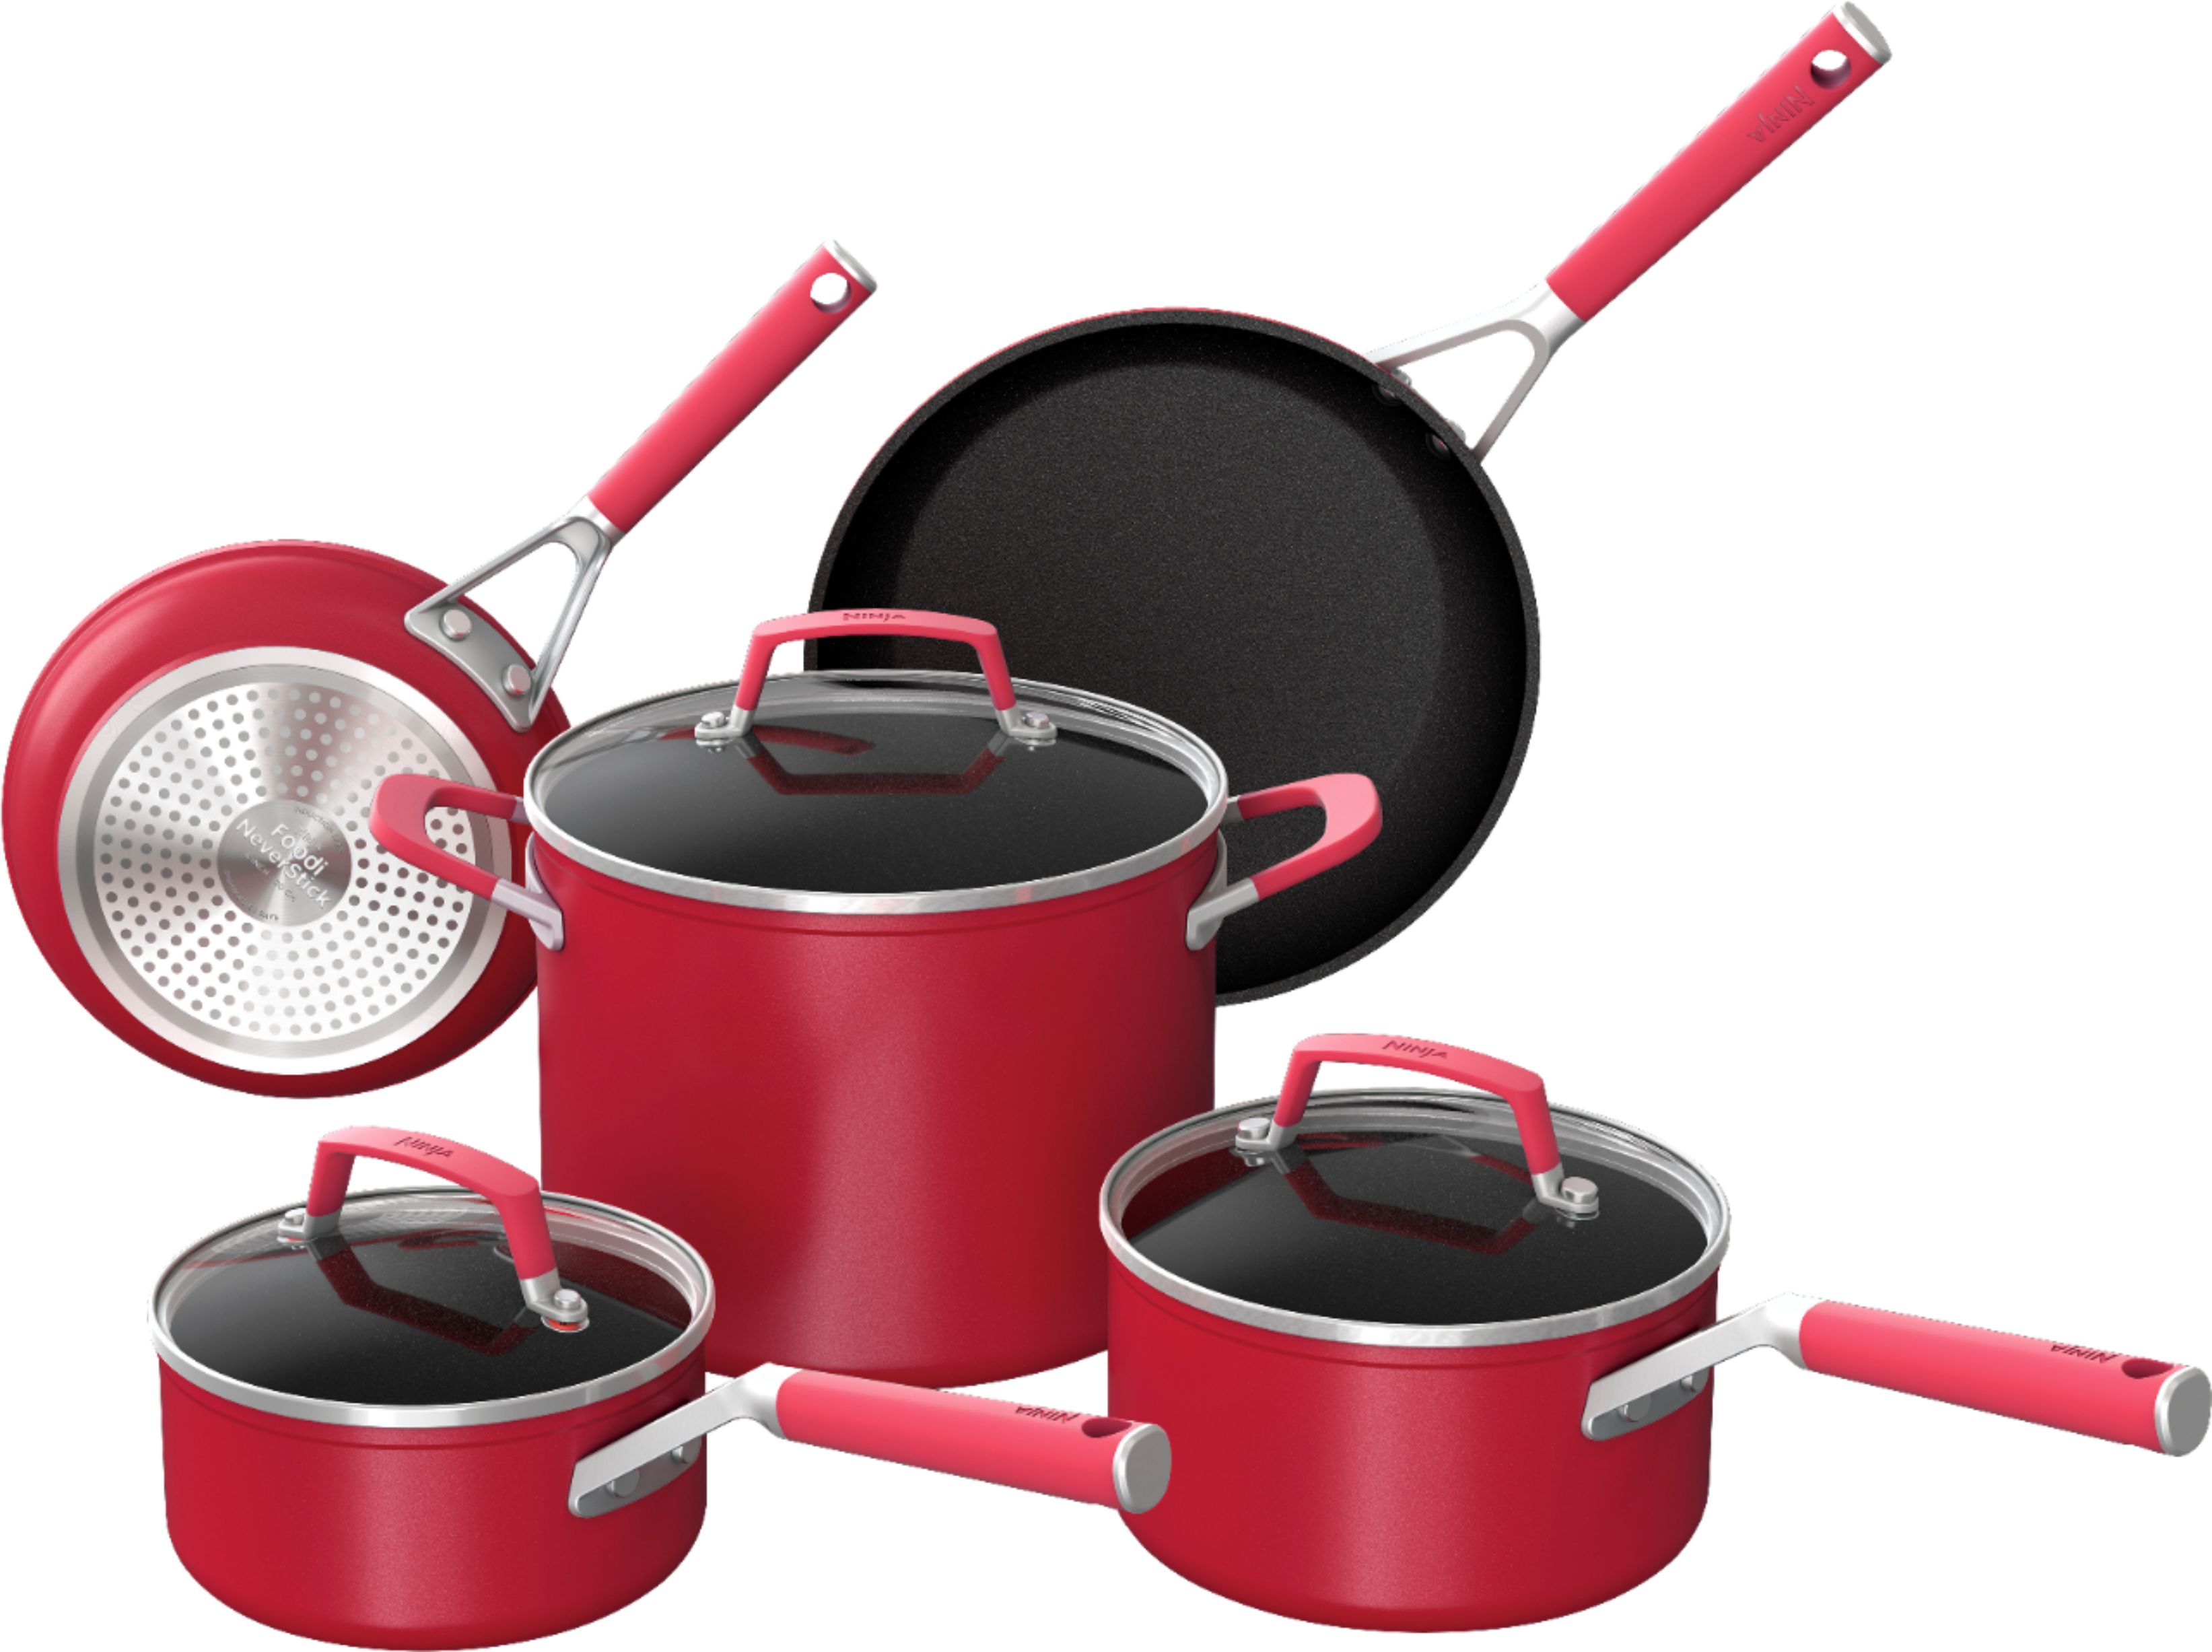 Red Copper Ceramic Copper Infused 10 Piece Cookware Set, Non-Stick, PFOA &  PTFE Free, As Seen on TV 